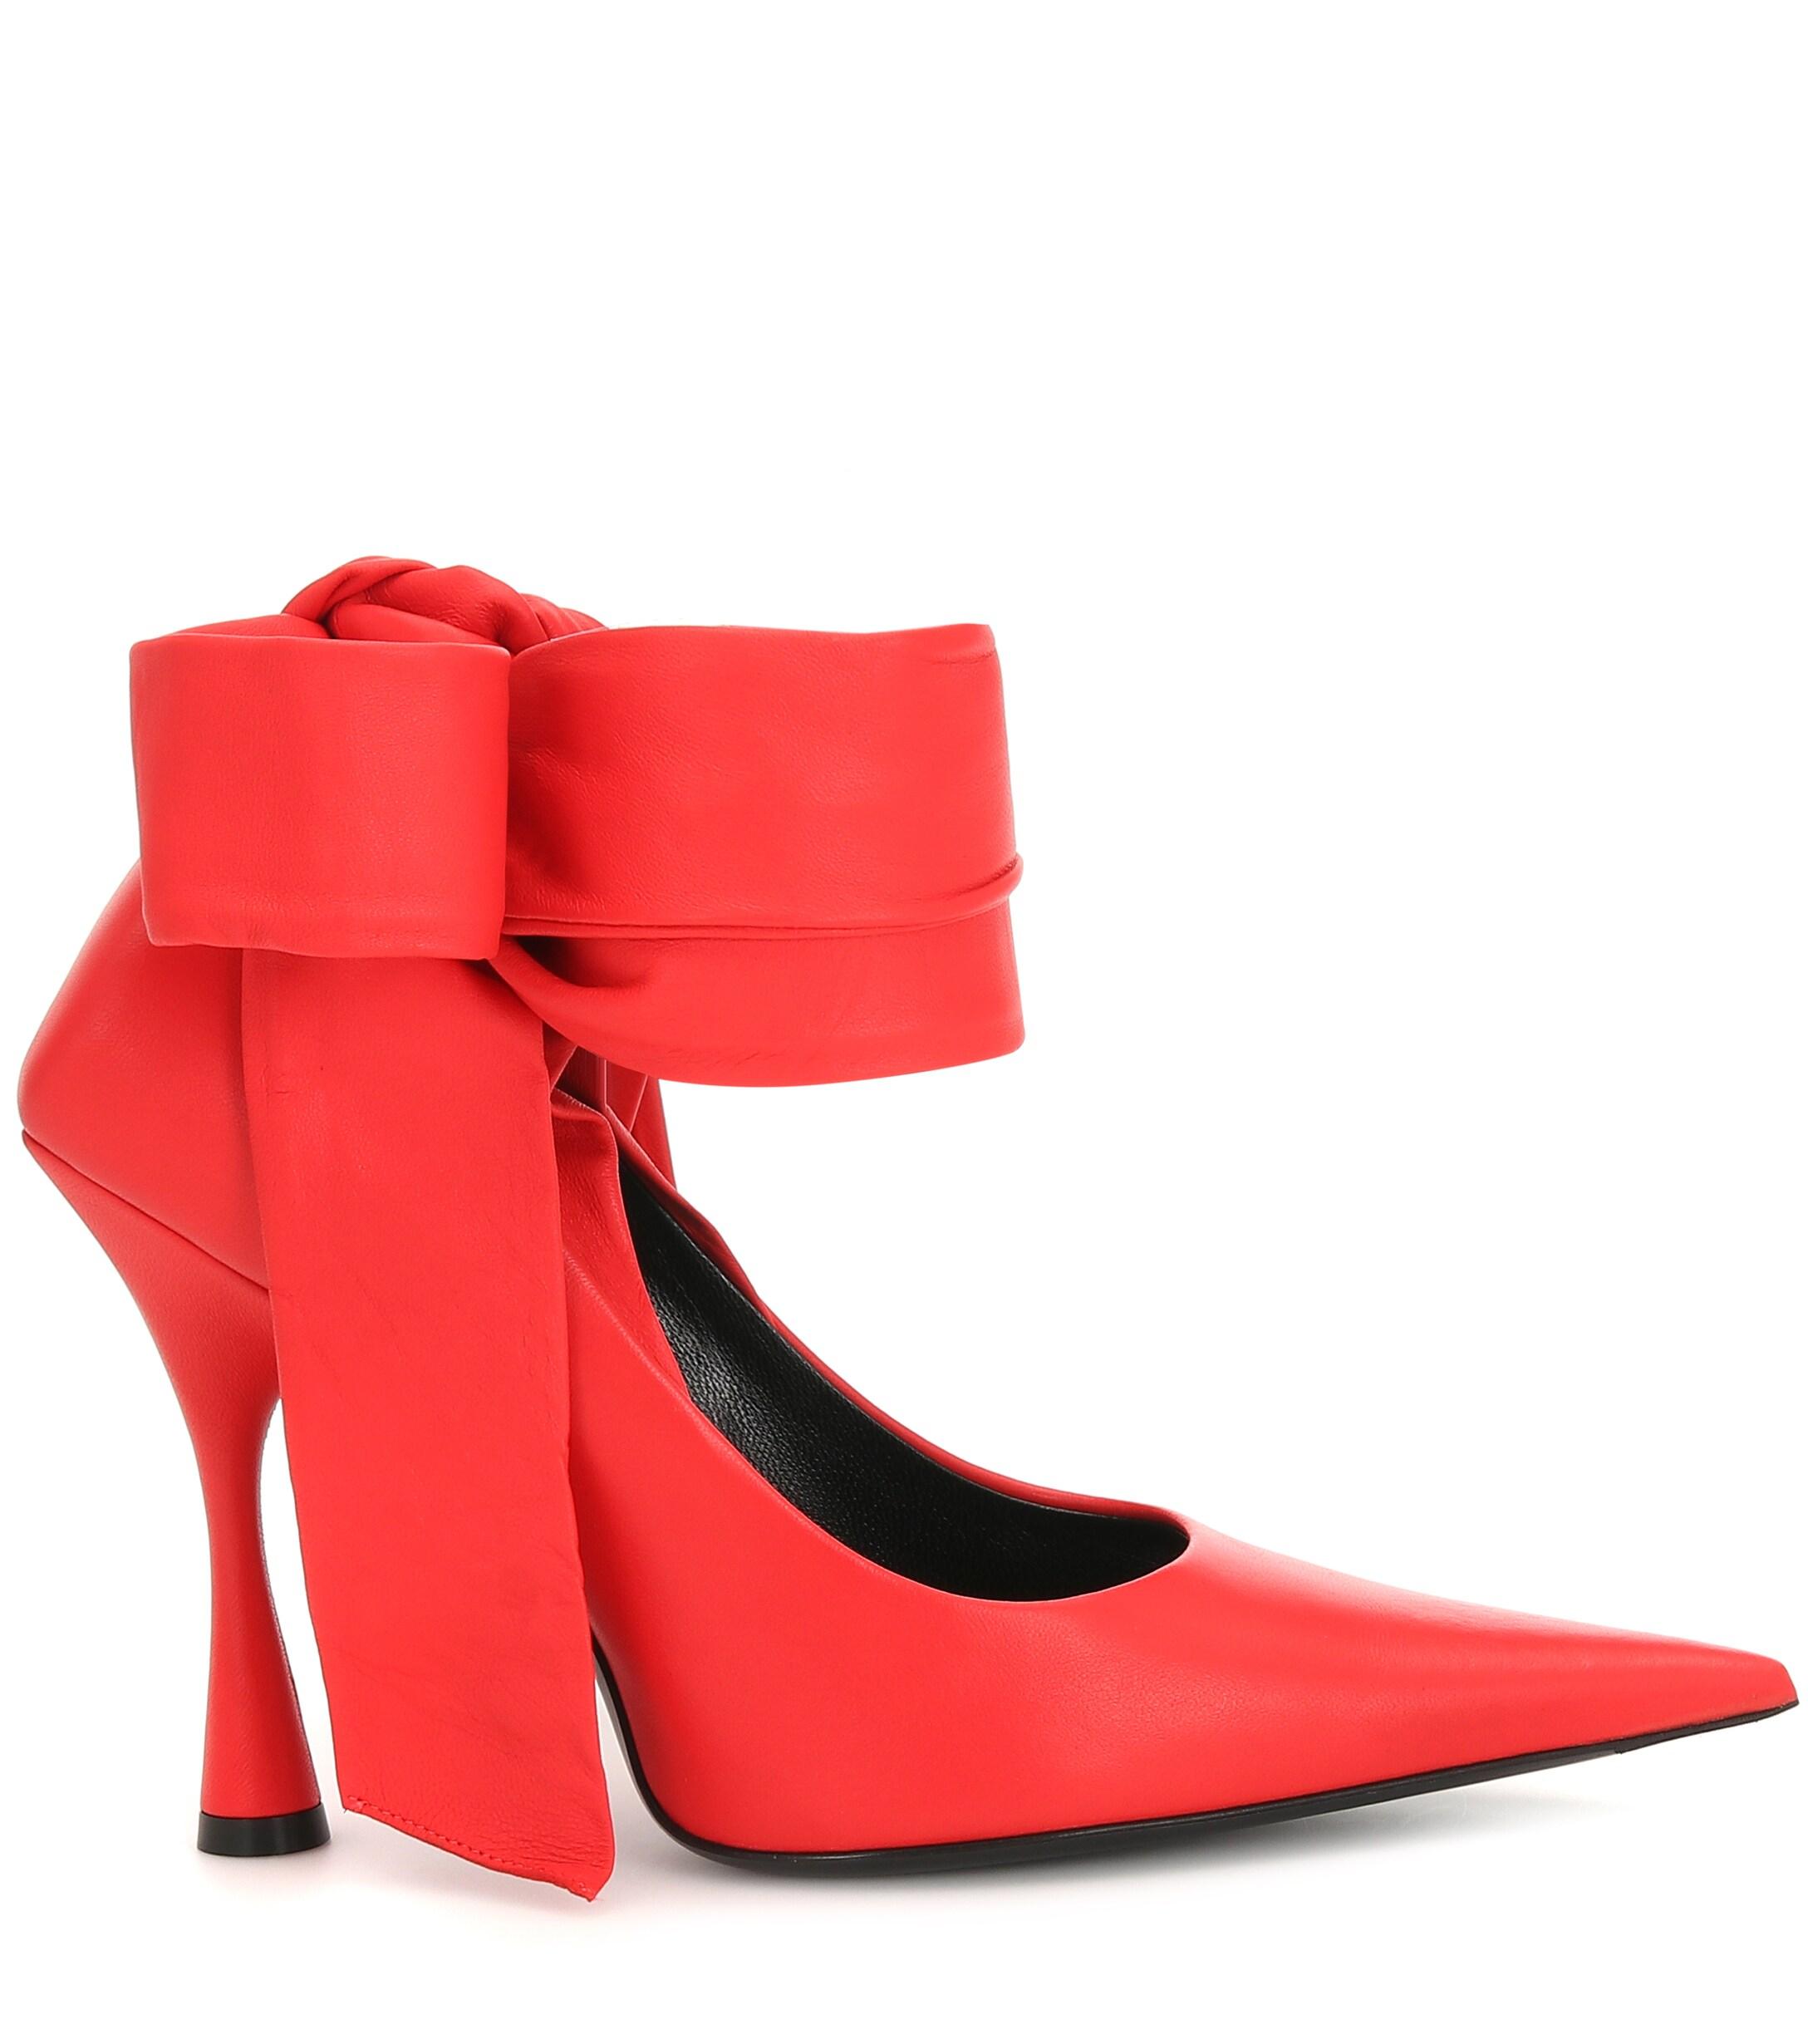 Balenciaga Dance Knife Leather Pumps in Red | Lyst